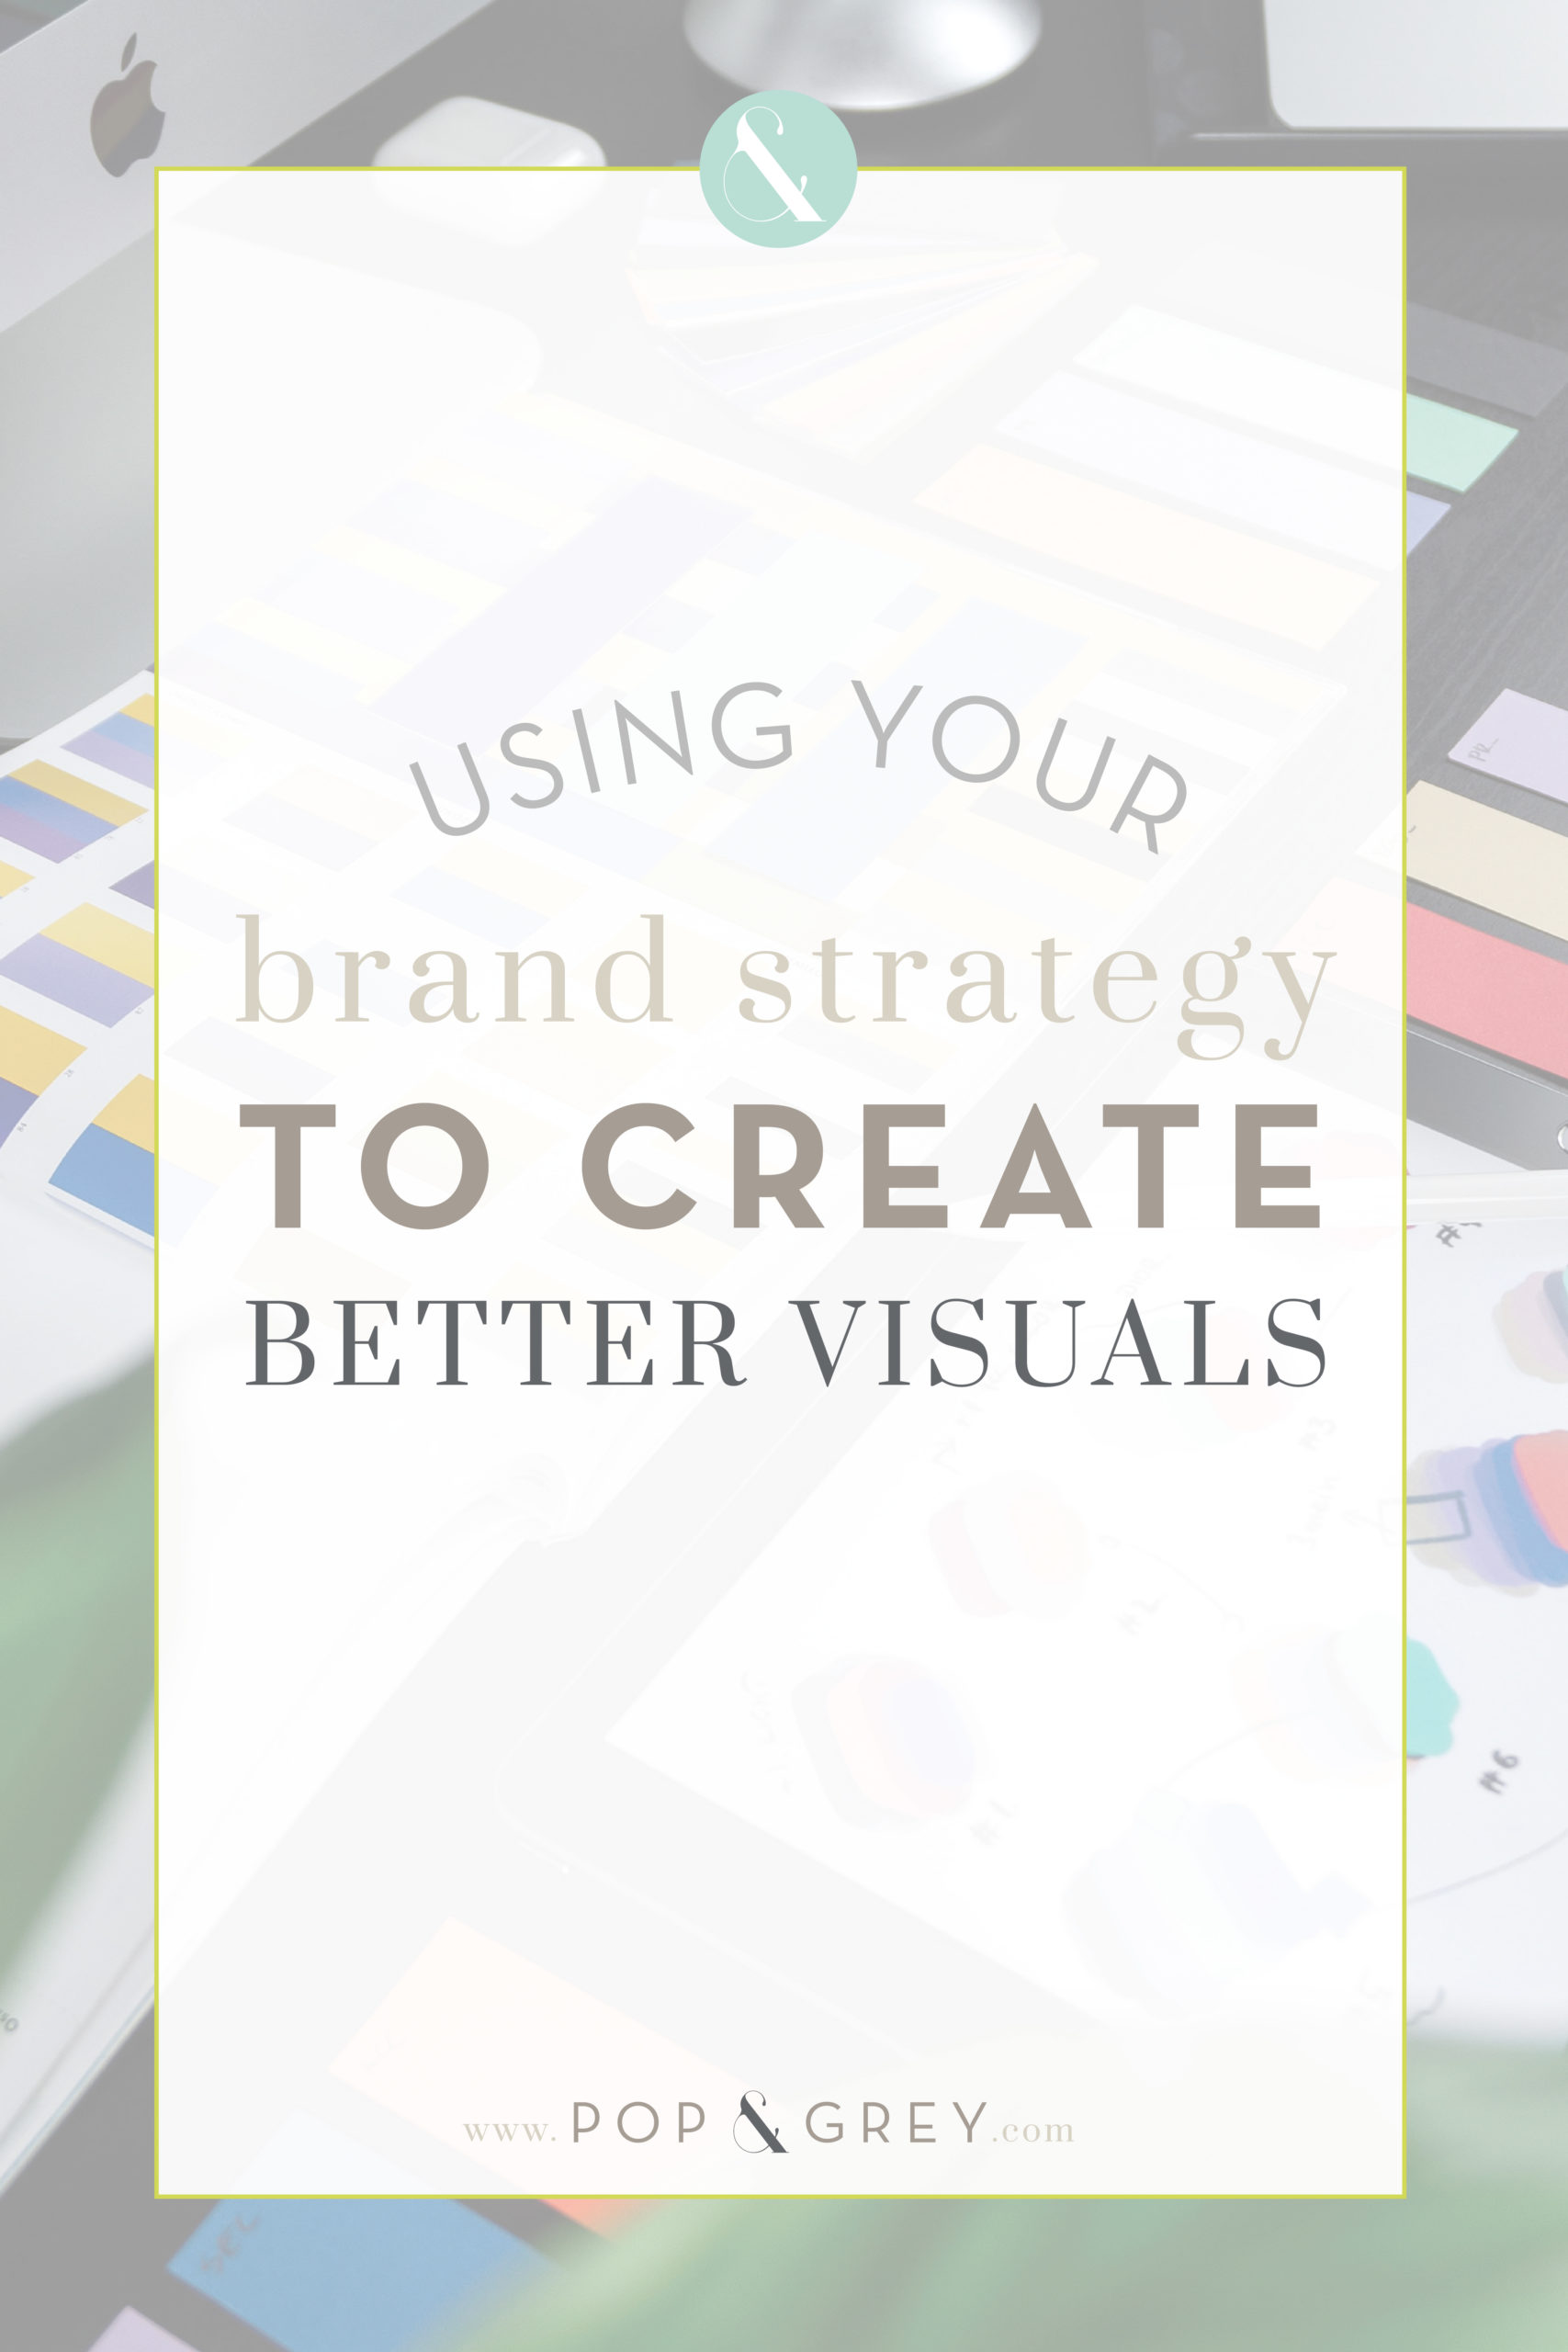 Using your brand strategy to create better visuals - Pop and Grey